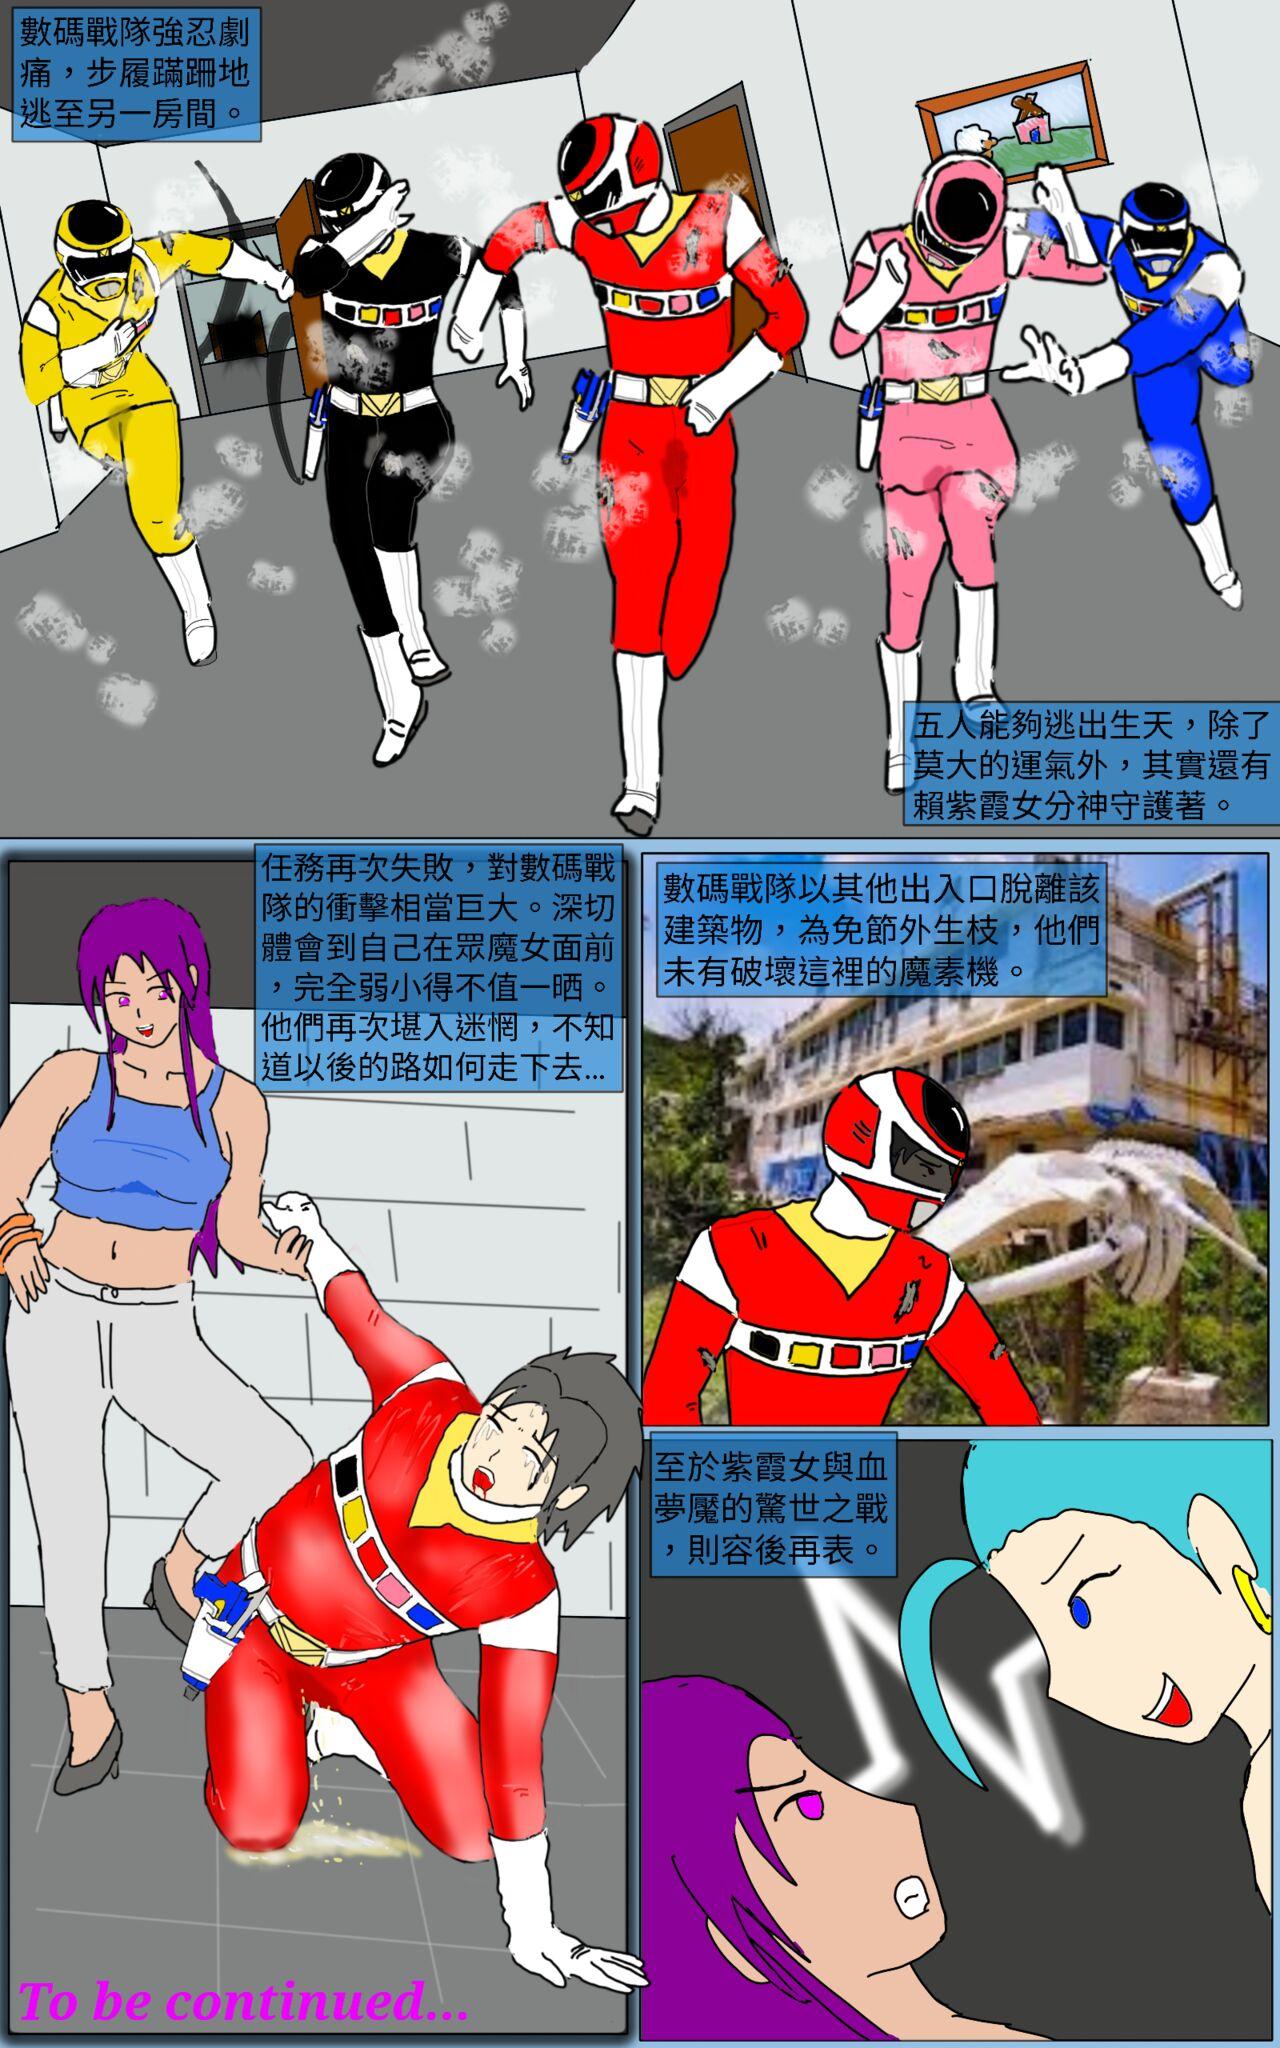 Tied Mission 16 - Super sentai High Heels - Page 43